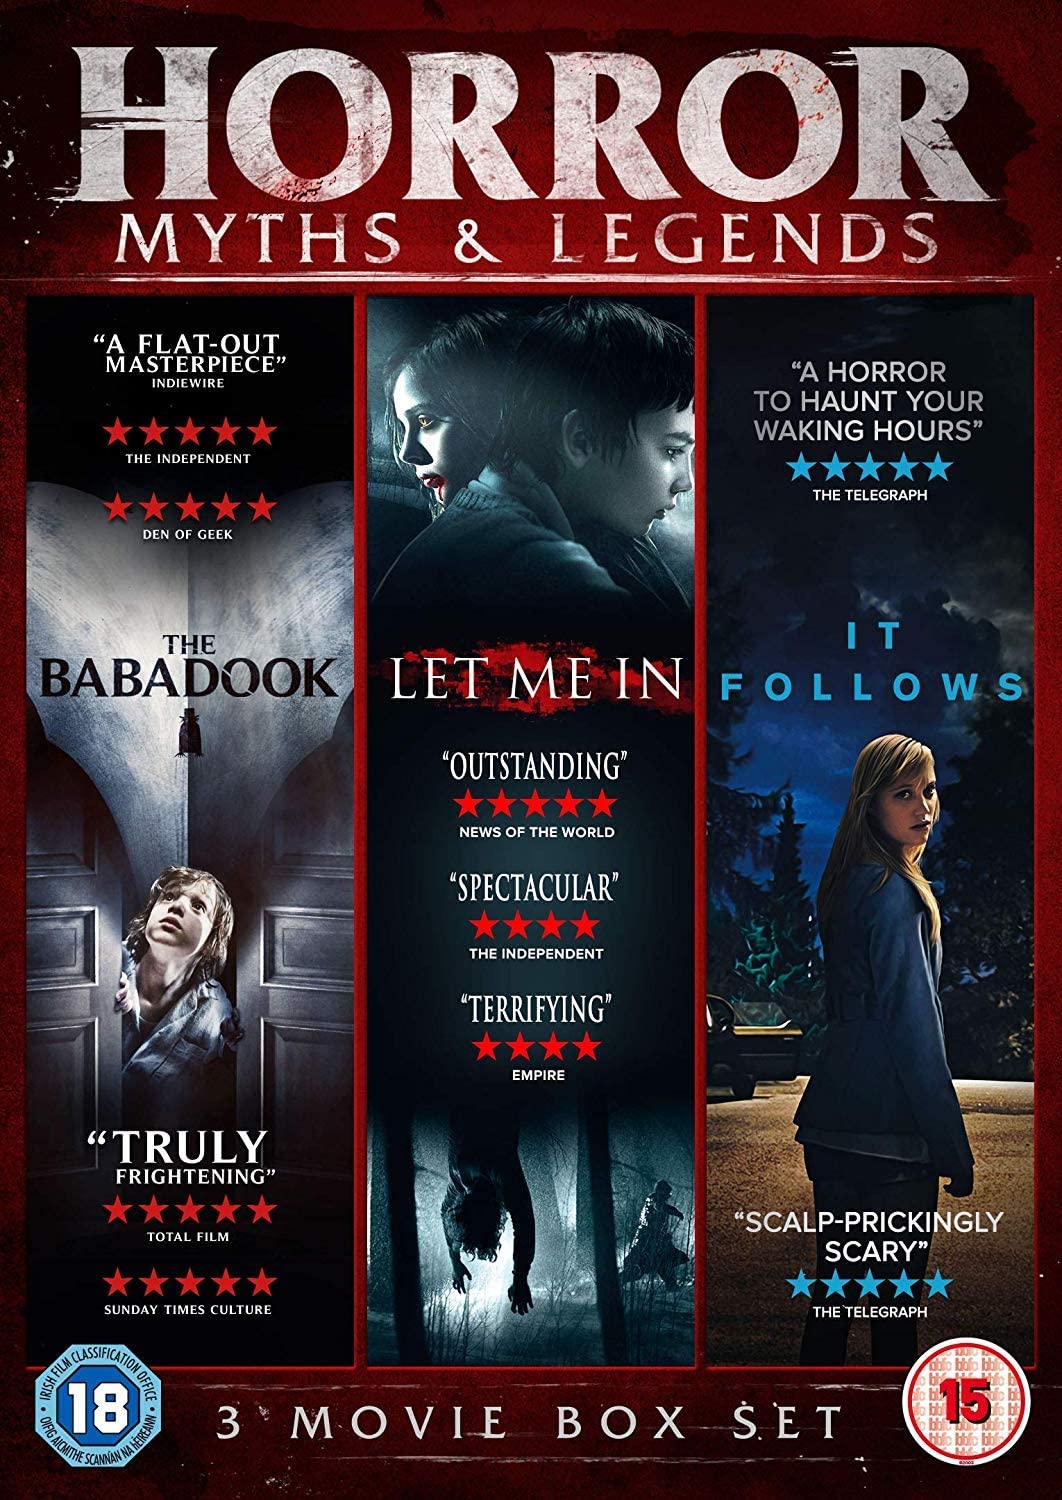 Horror Myths & Legends Boxset (The Babadook / IT Follows / Let Me In)